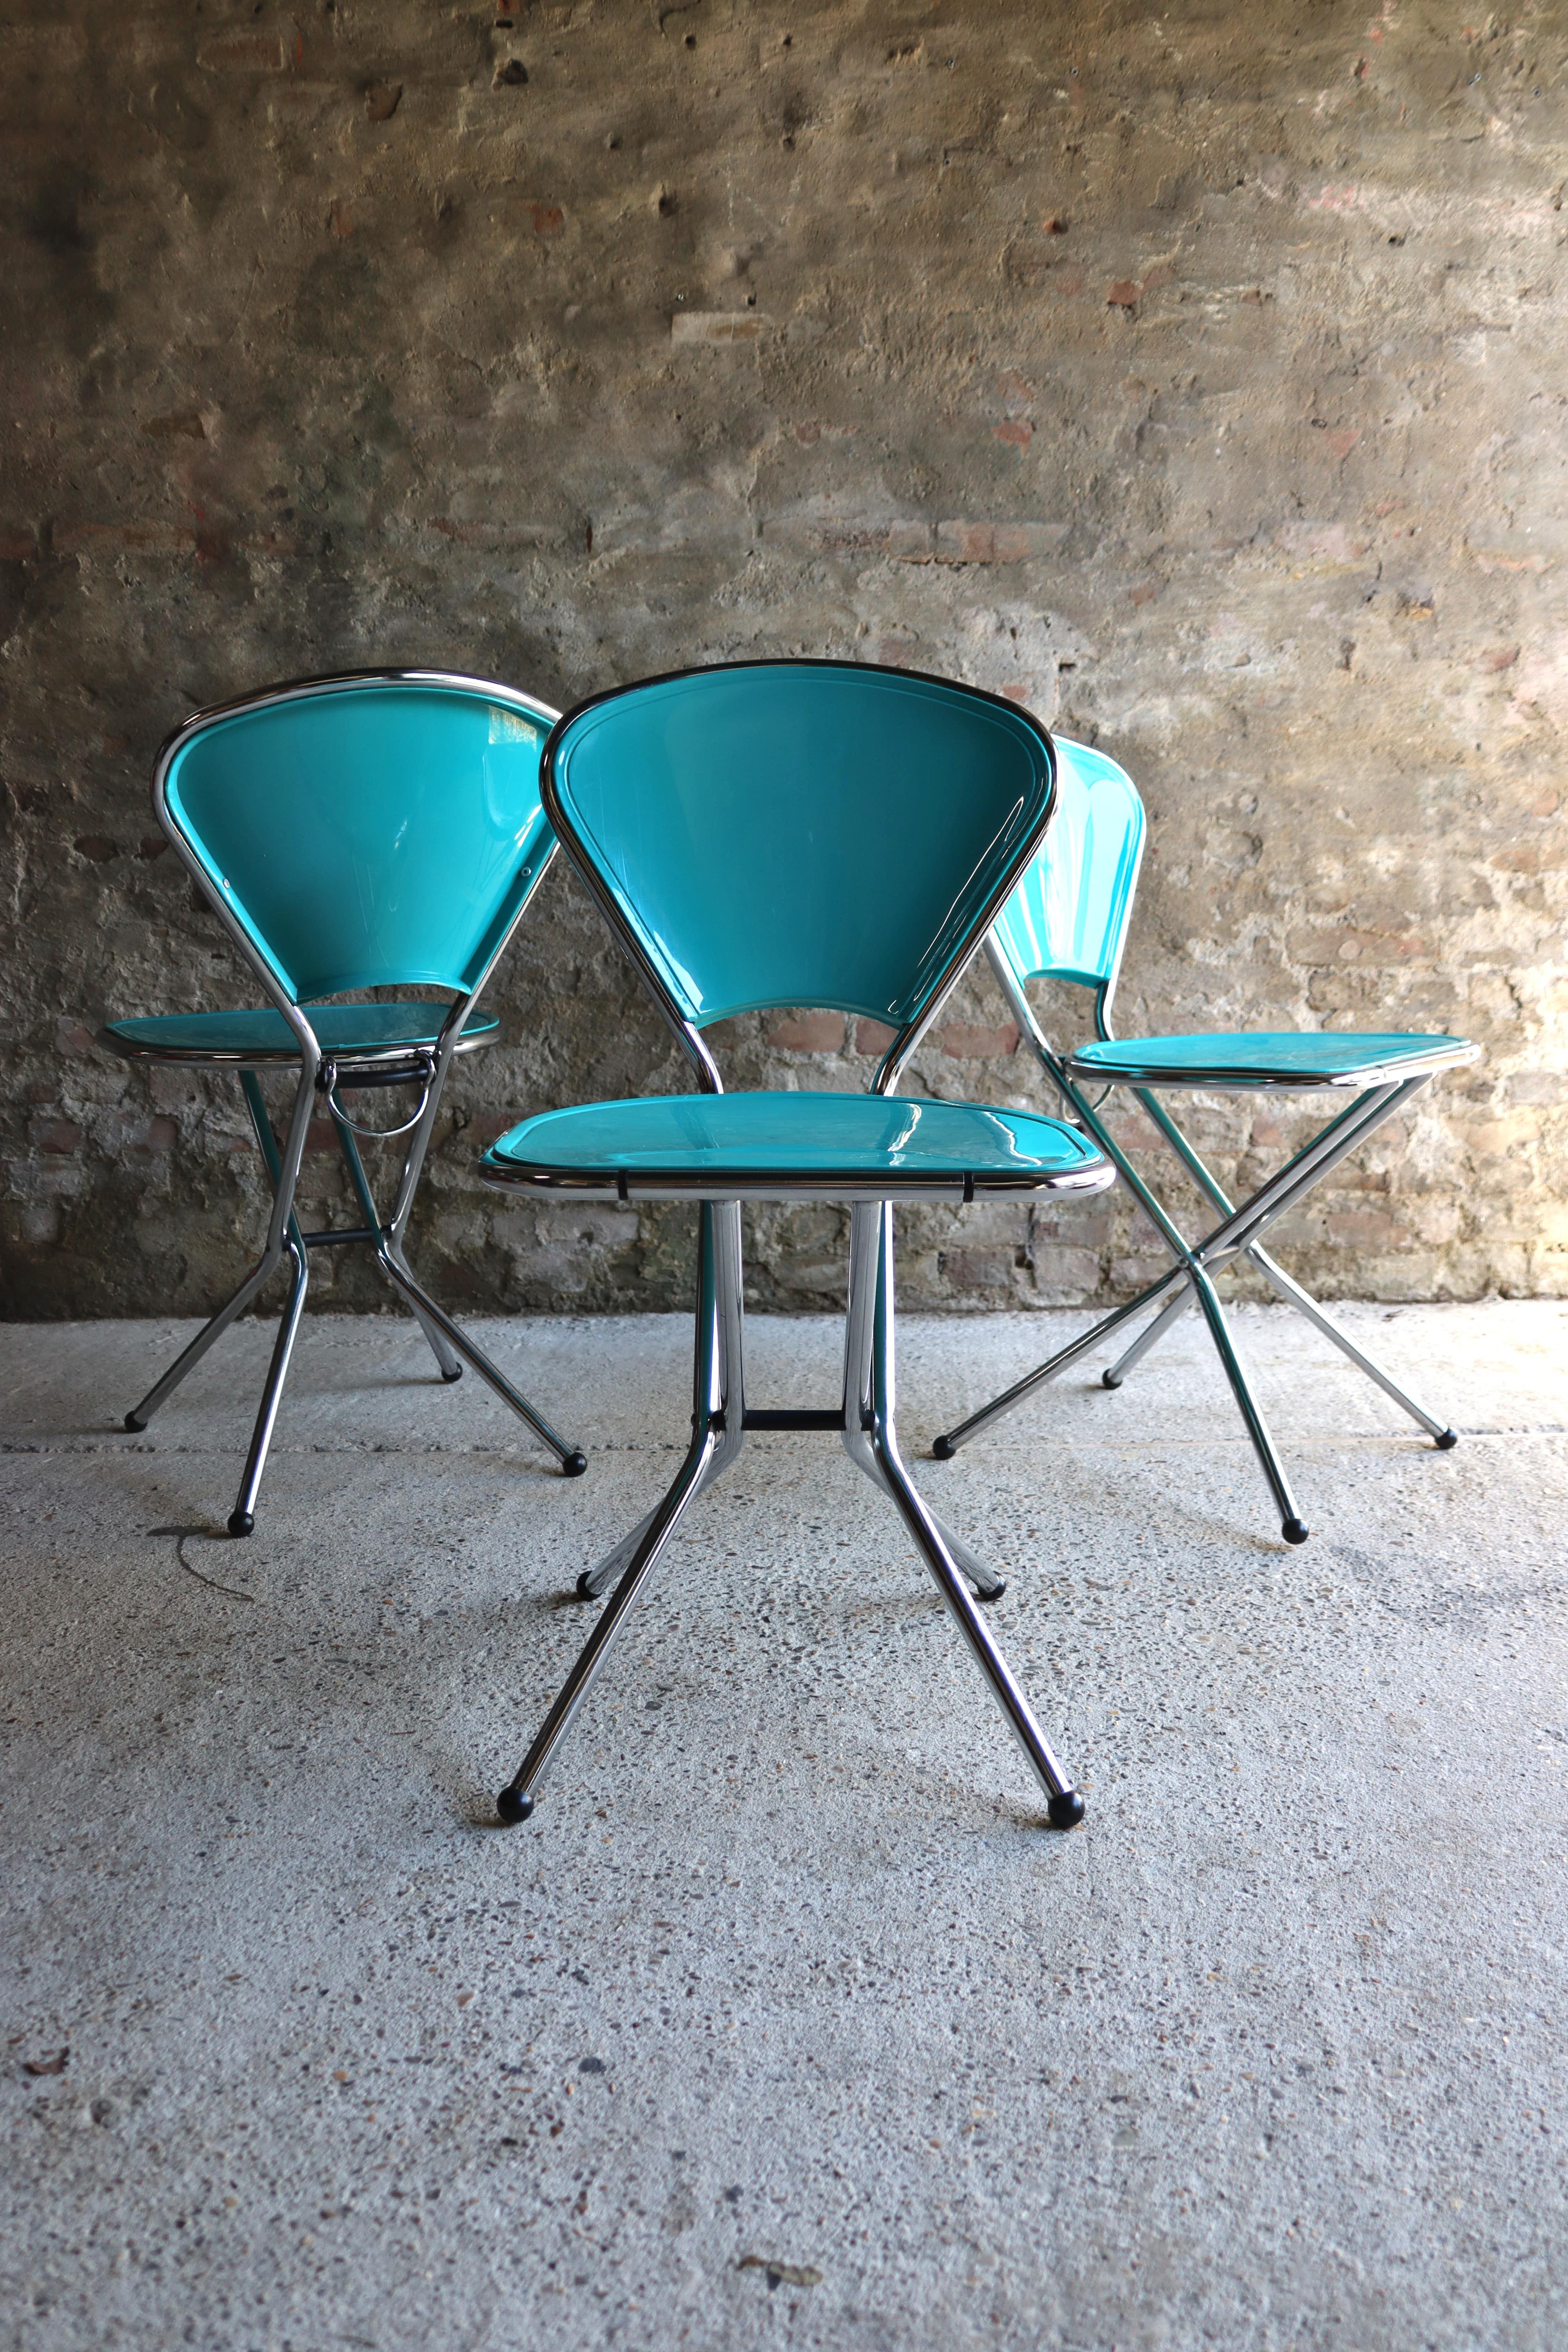 These cool folding chairs are designed by Niels Gammelgaard for IKEA and were launched for a short period starting in 1987. These chairs are super rare nowadays. We’re offering 3 folding chairs. They’re all in good condition, but one of the chairs